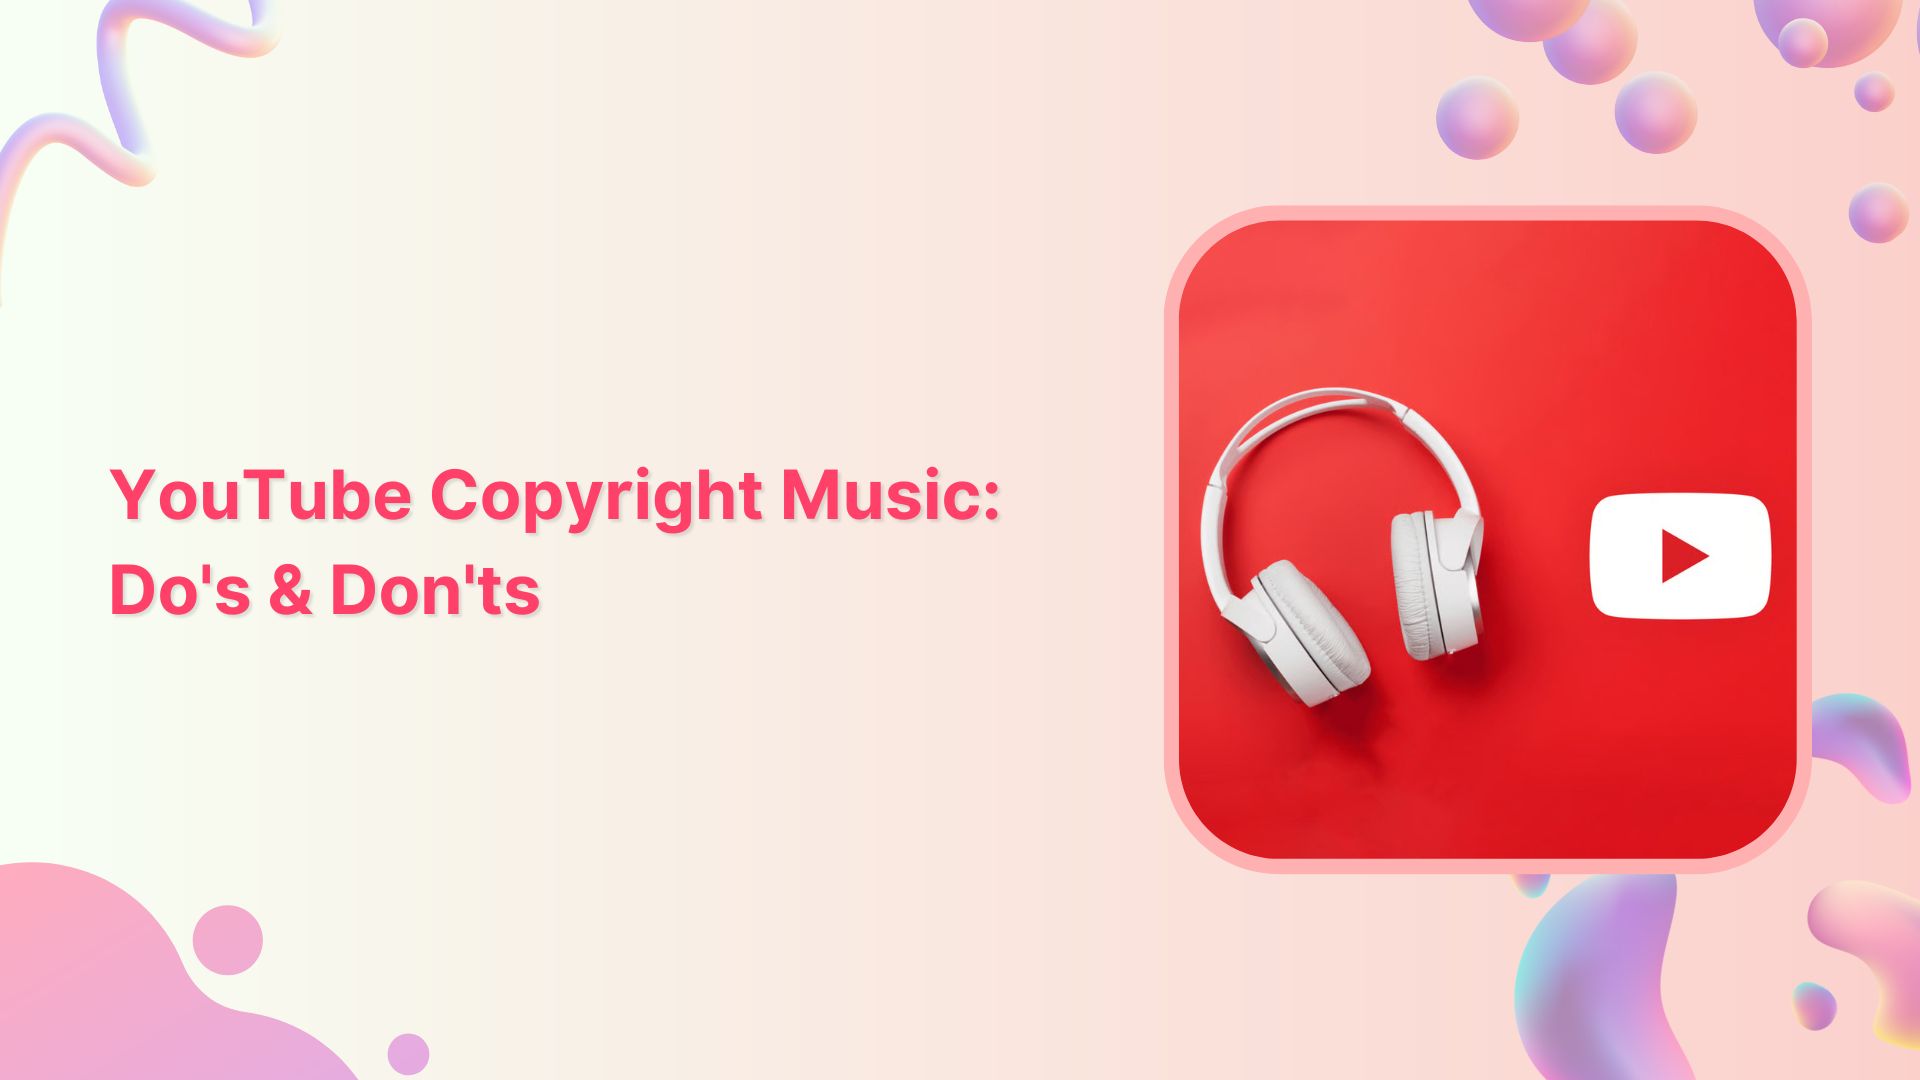 YouTube Copyright Music Do’s and Don’ts